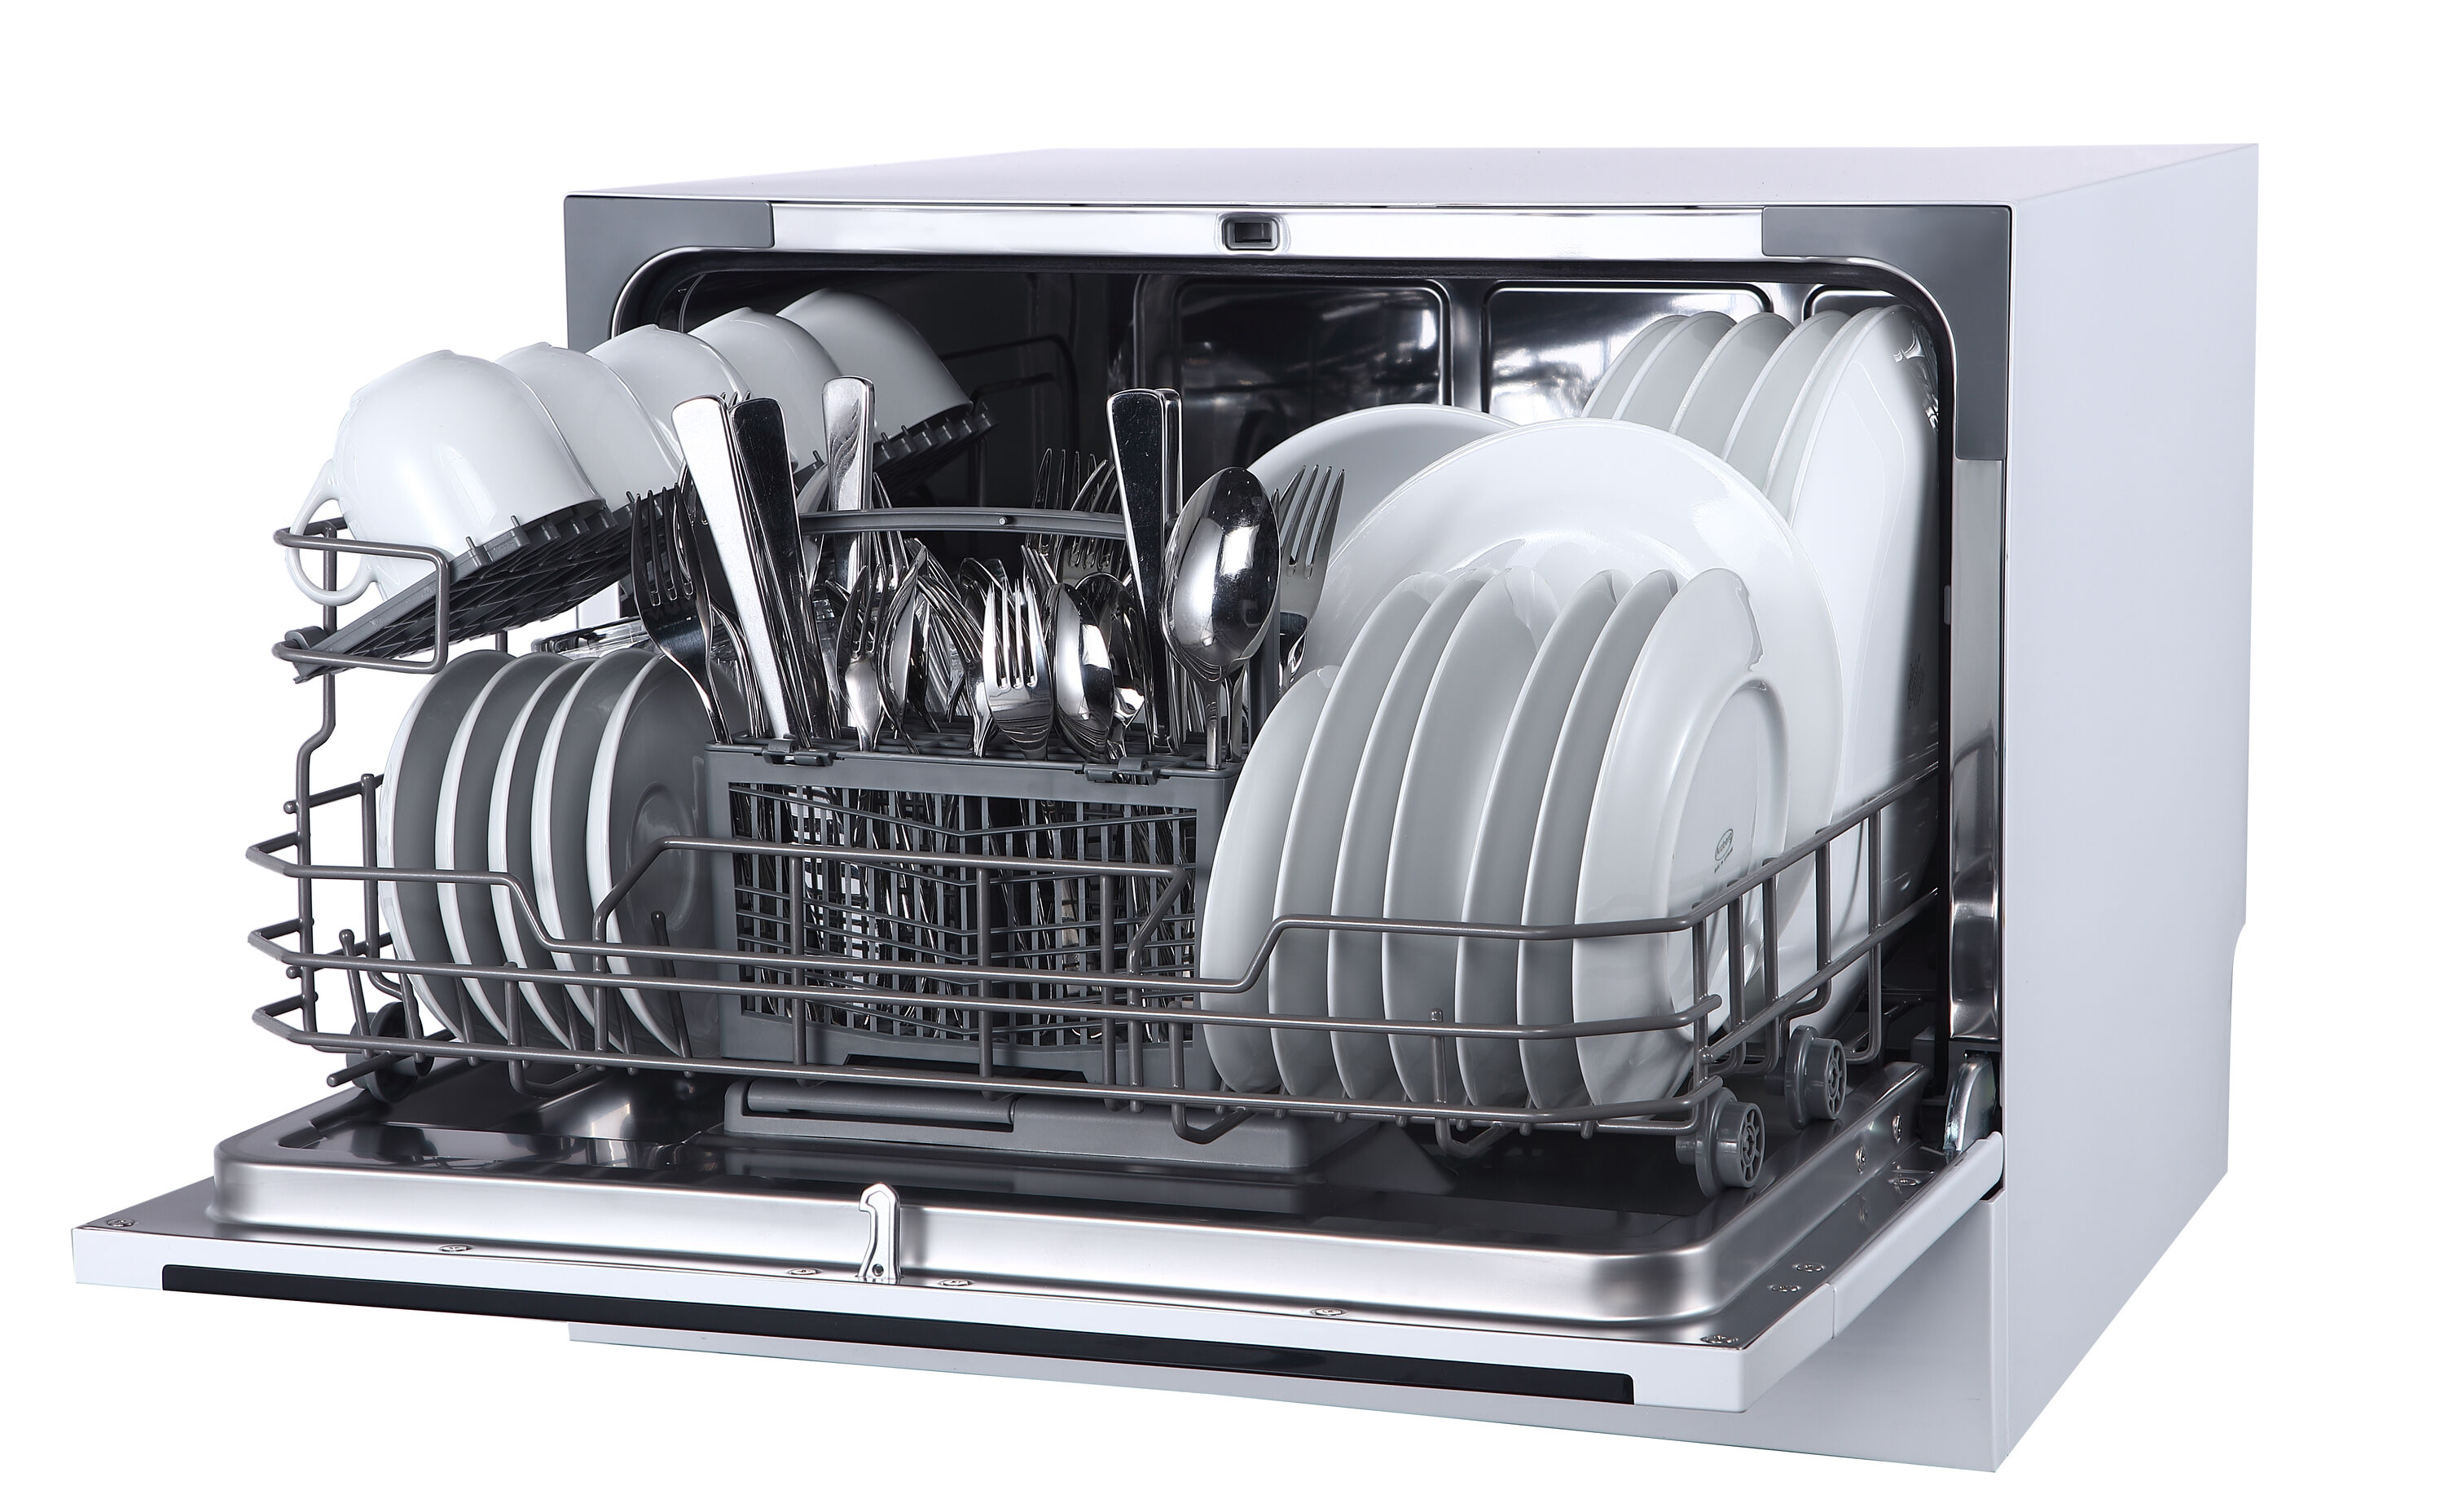 Farberware Portable Countertop Dishwasher - appliances - by owner - sale -  craigslist